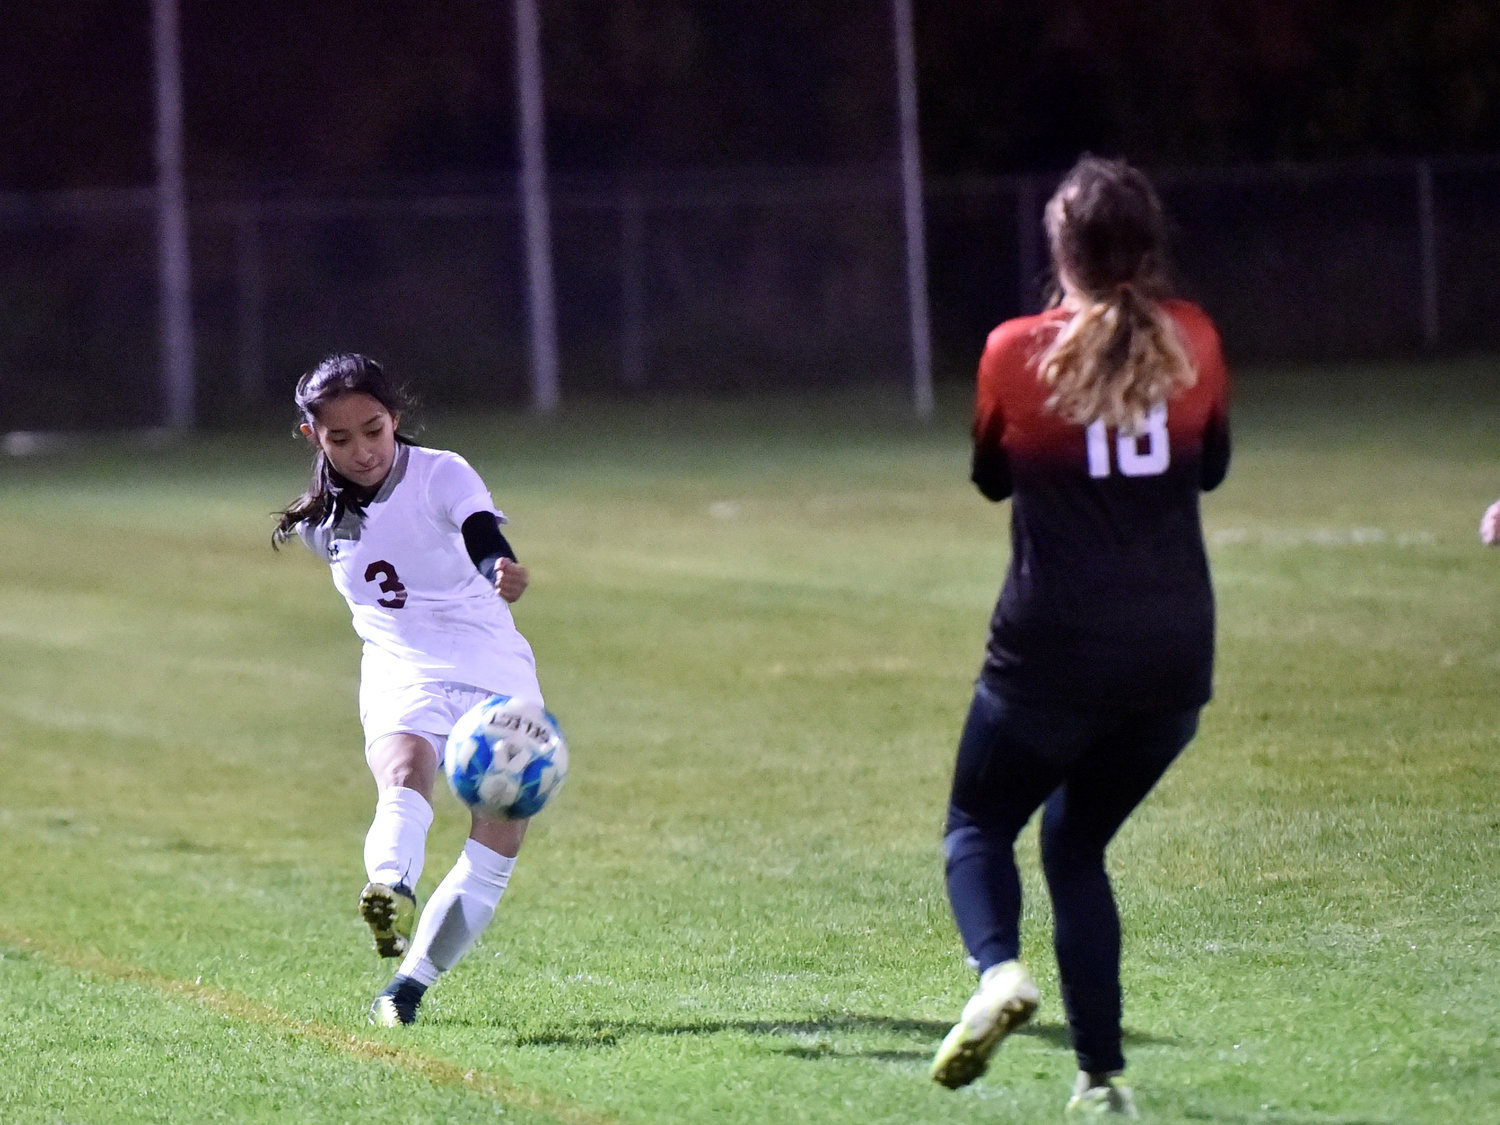 Winlock’s Gabby Cruz clears the ball up the pitch against Toledo on Oct. 18.